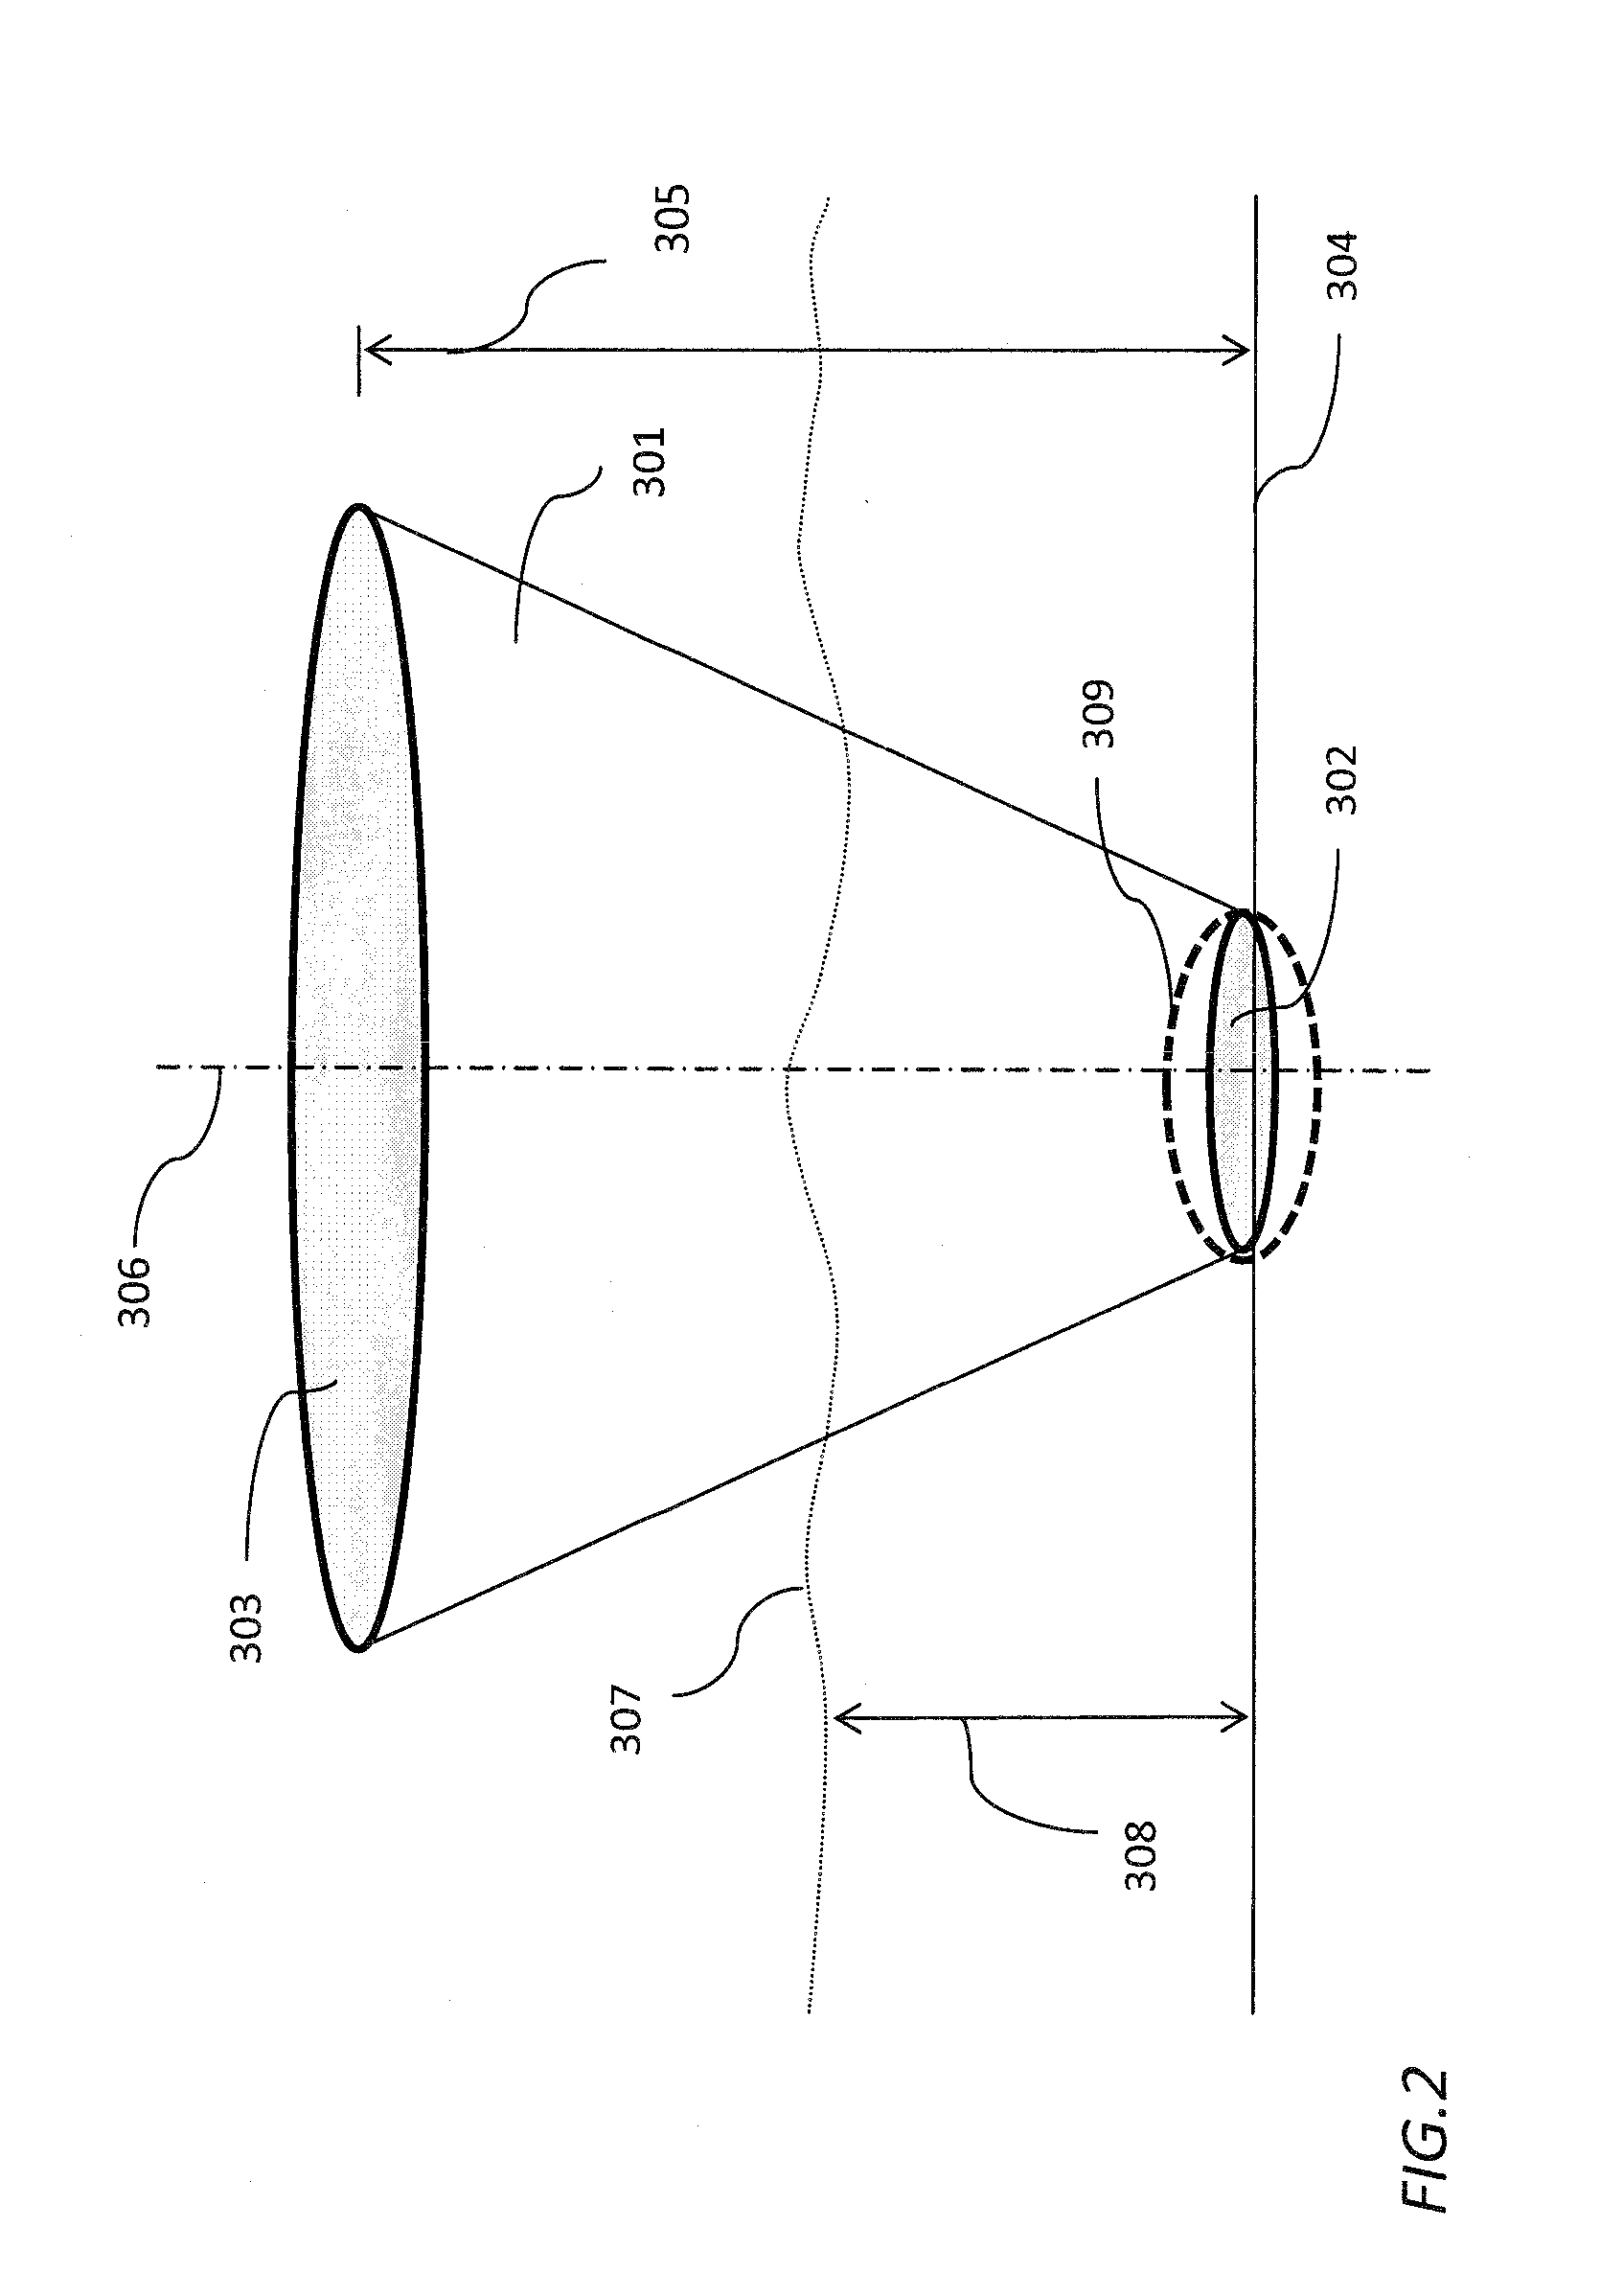 Illumination Methods And Systems For Improving Image Resolution Of Imaging Systems